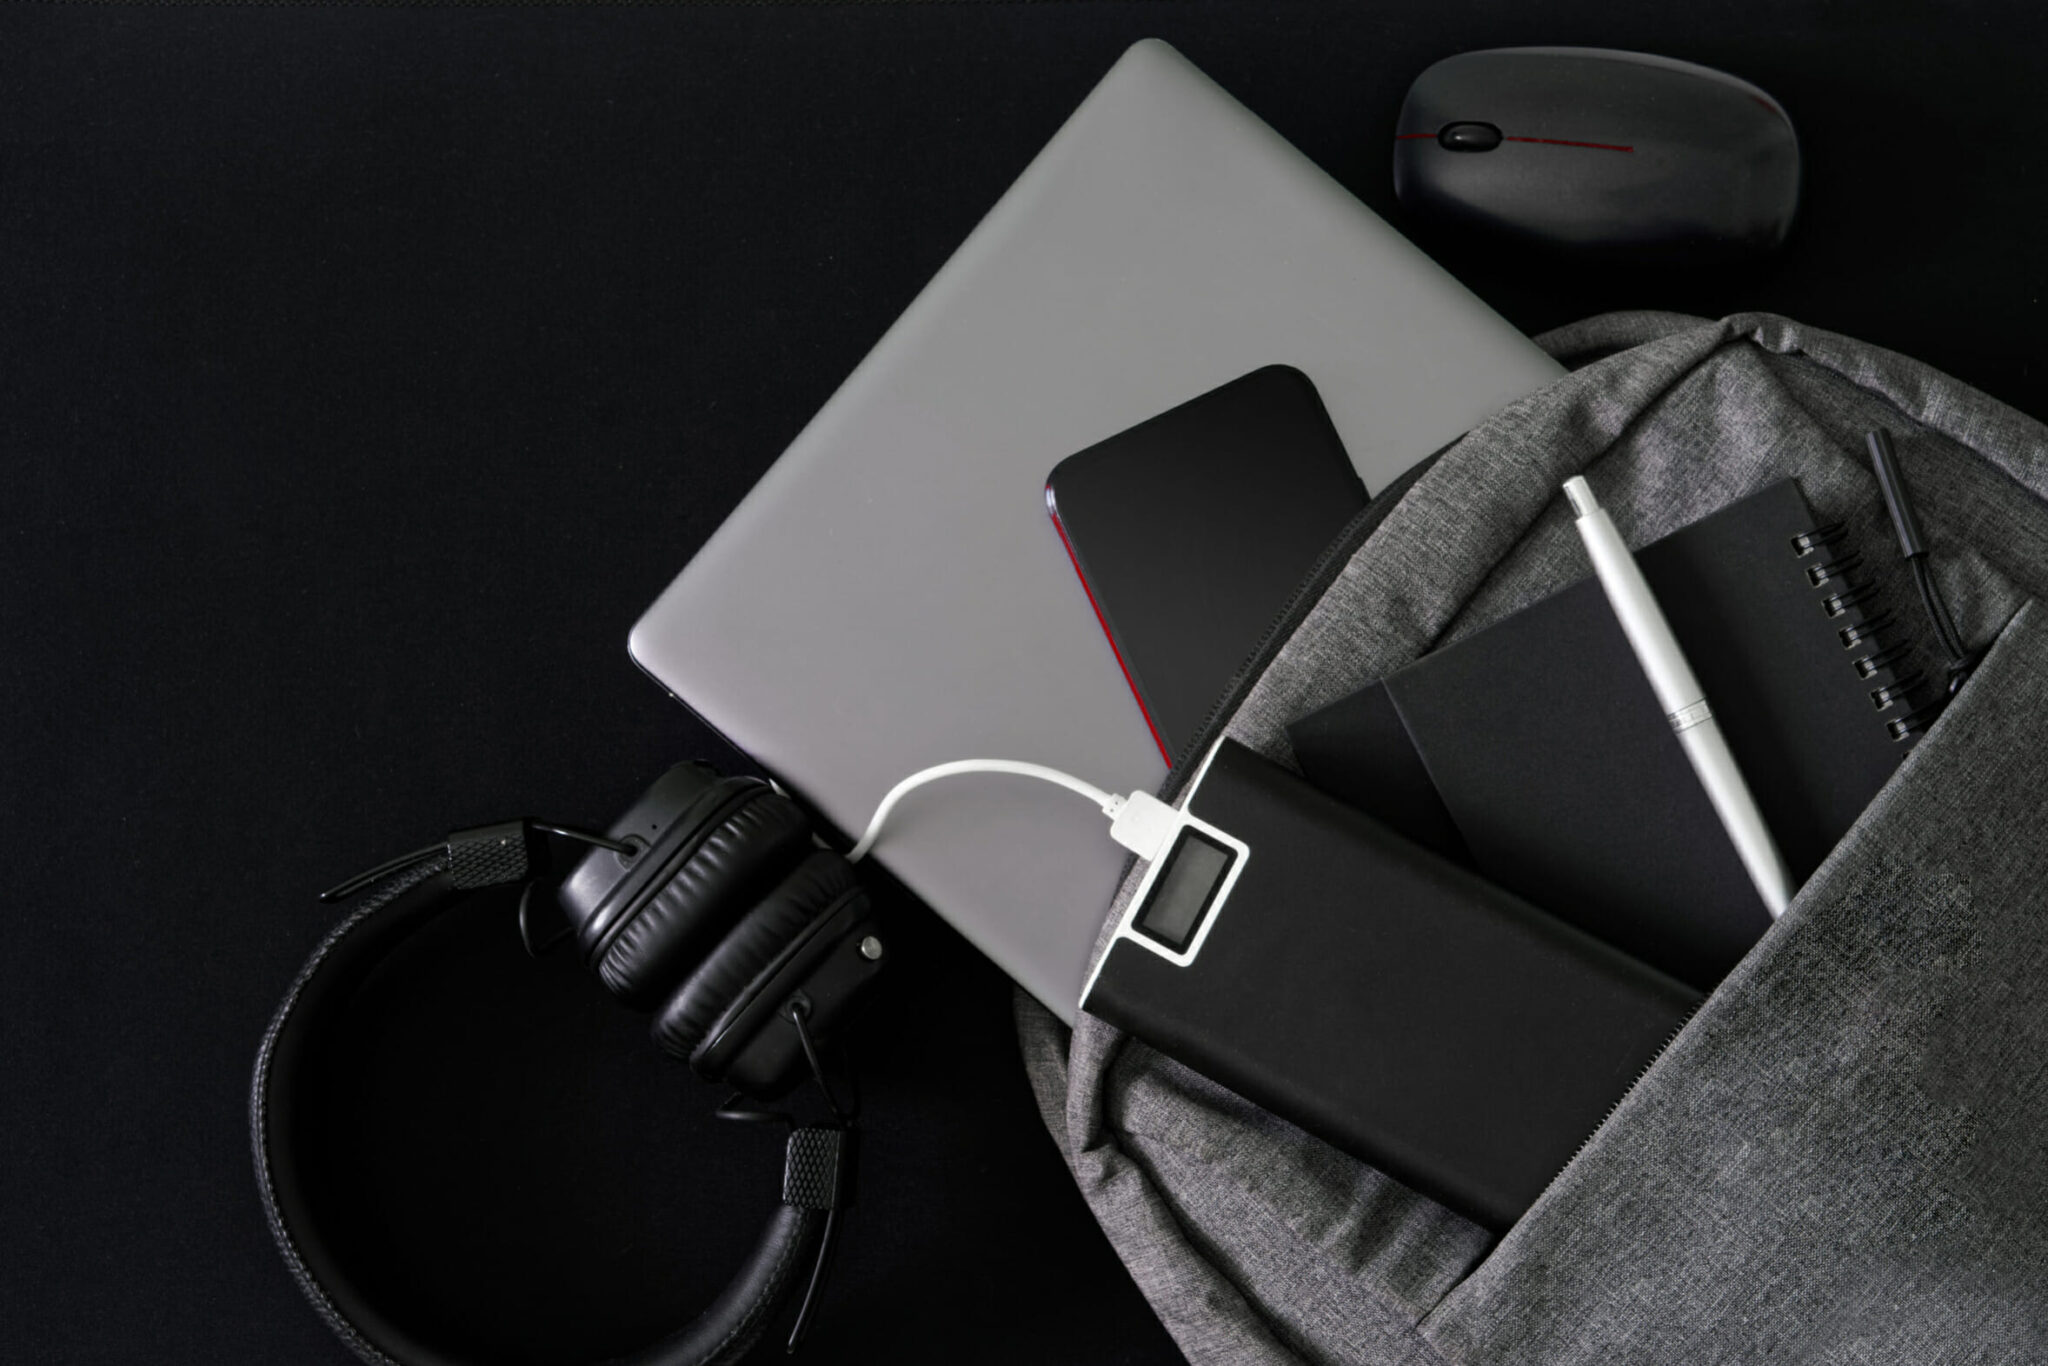 Silver laptop and modern gadgets lie in a gray backpack on a dark table